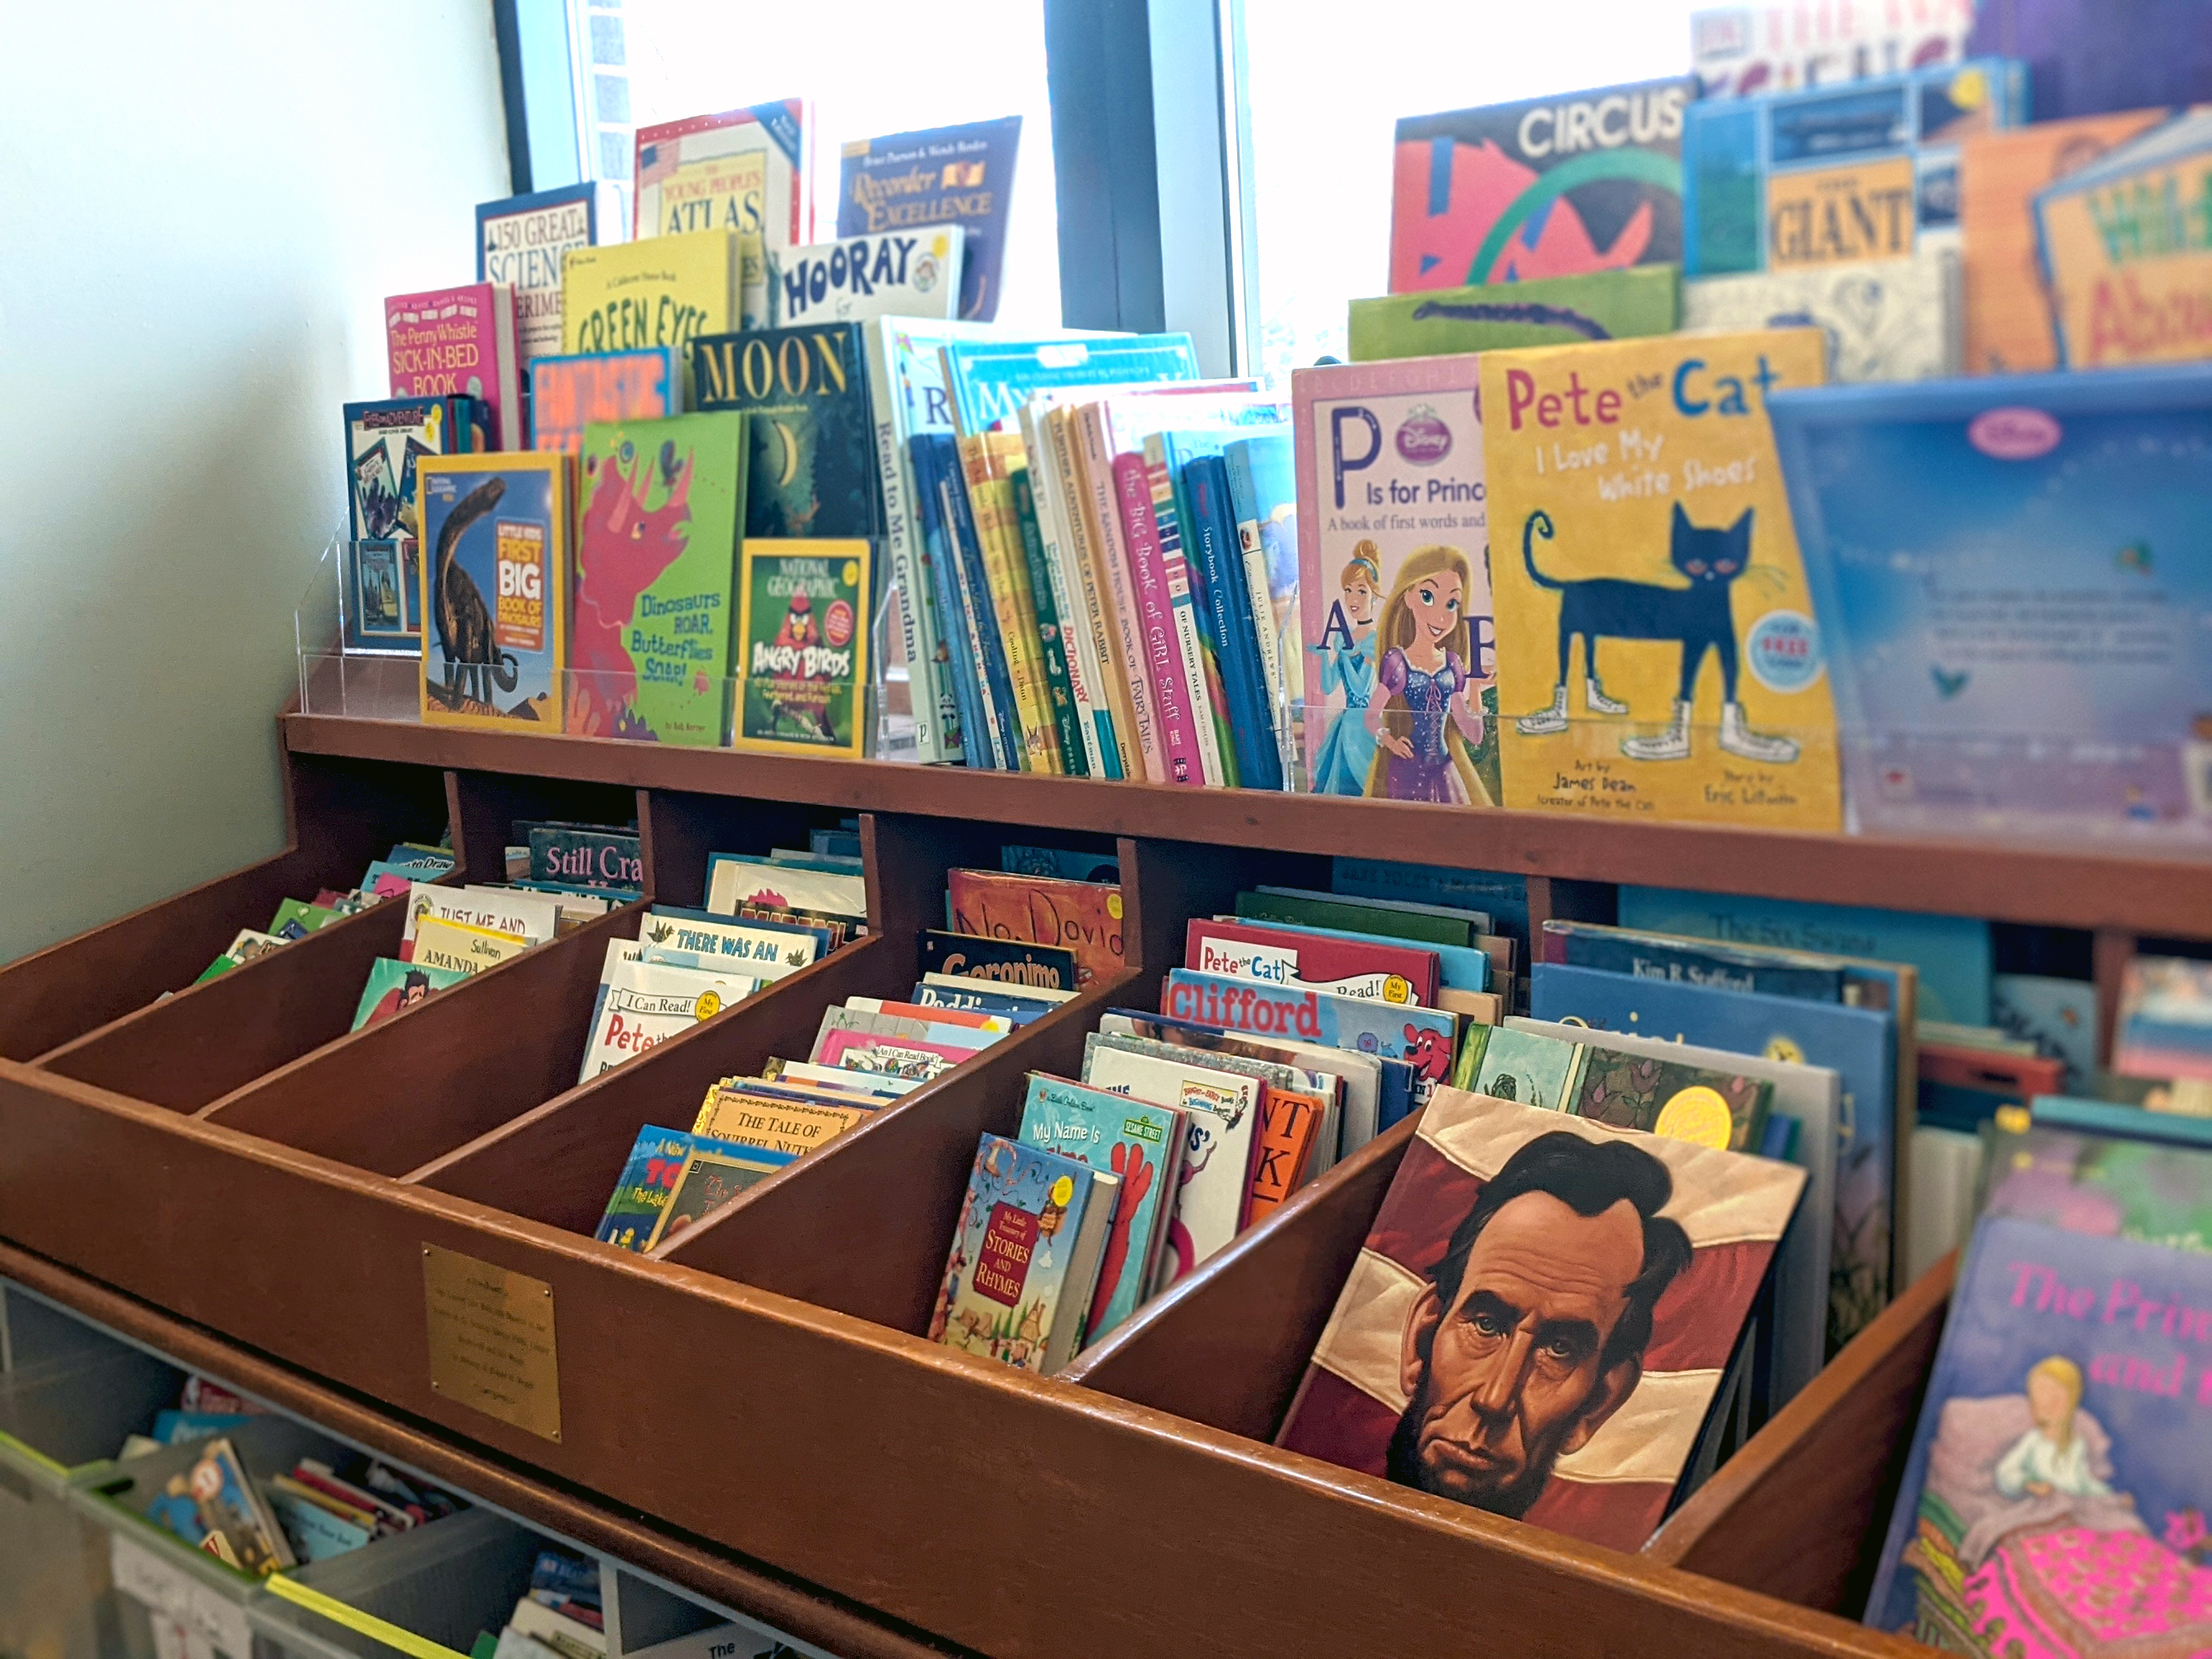 A massive collection of Children’s books in wooden bins and on a shelf near a window.